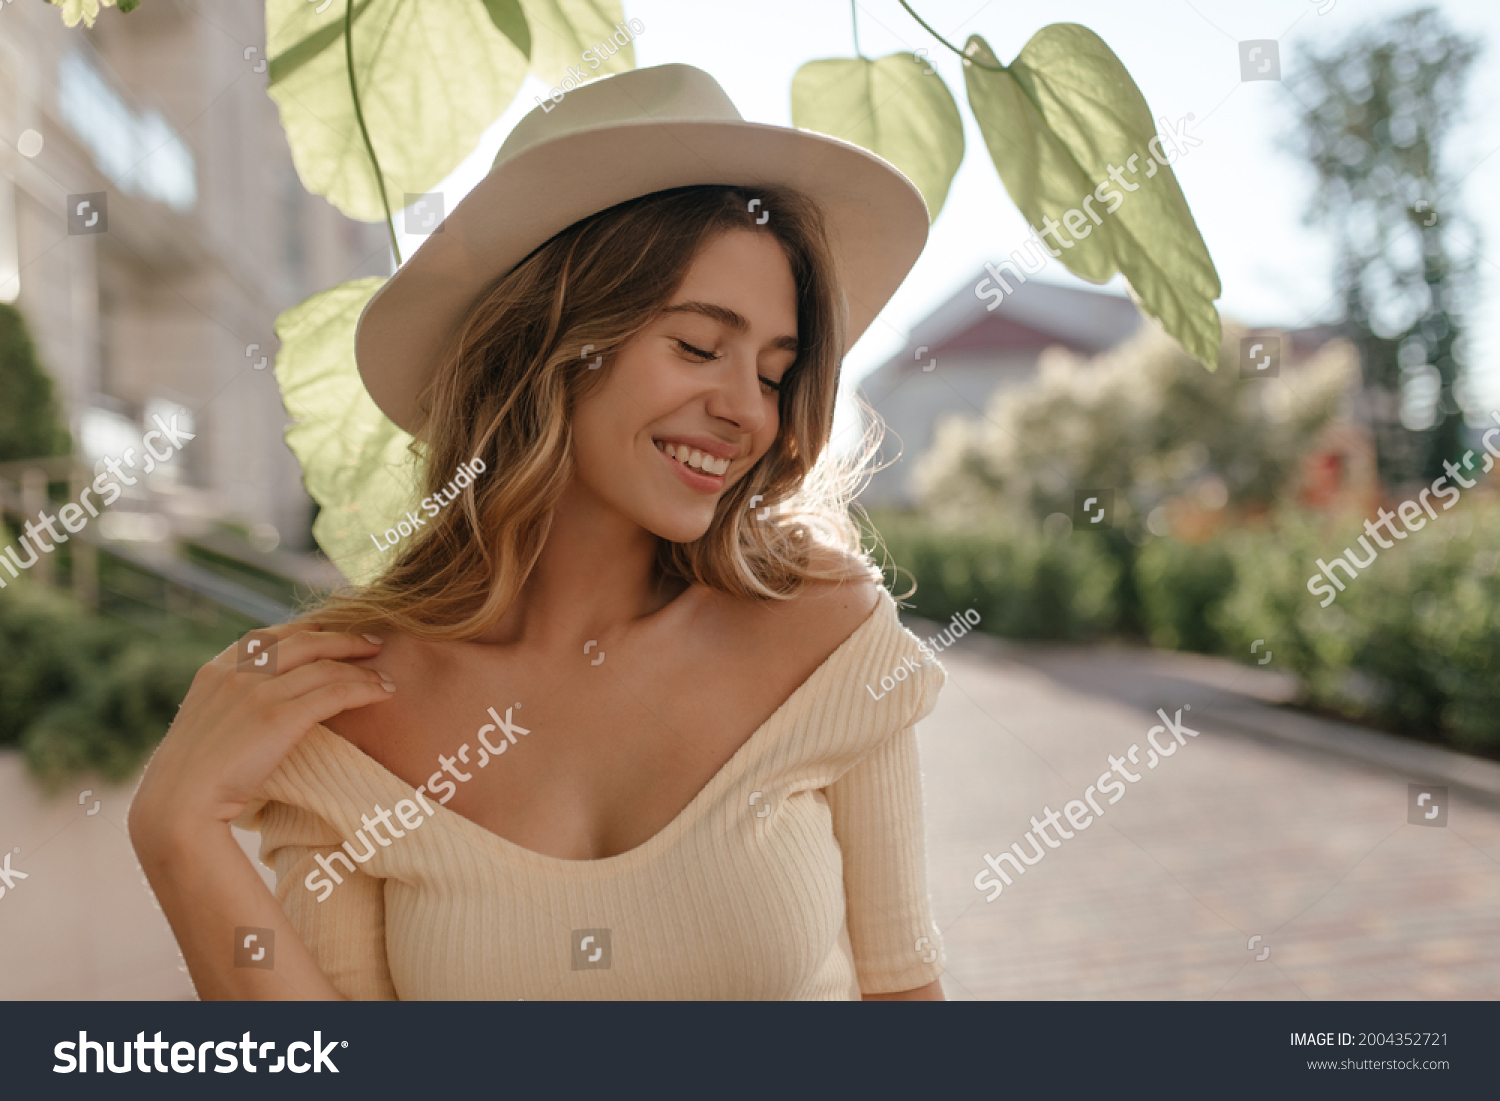 Sunny image of young stylish woman standing on street, in fashionable hat close-up. She has gentle smile and closed eyes. Nice neckline and bare shoulders. #2004352721